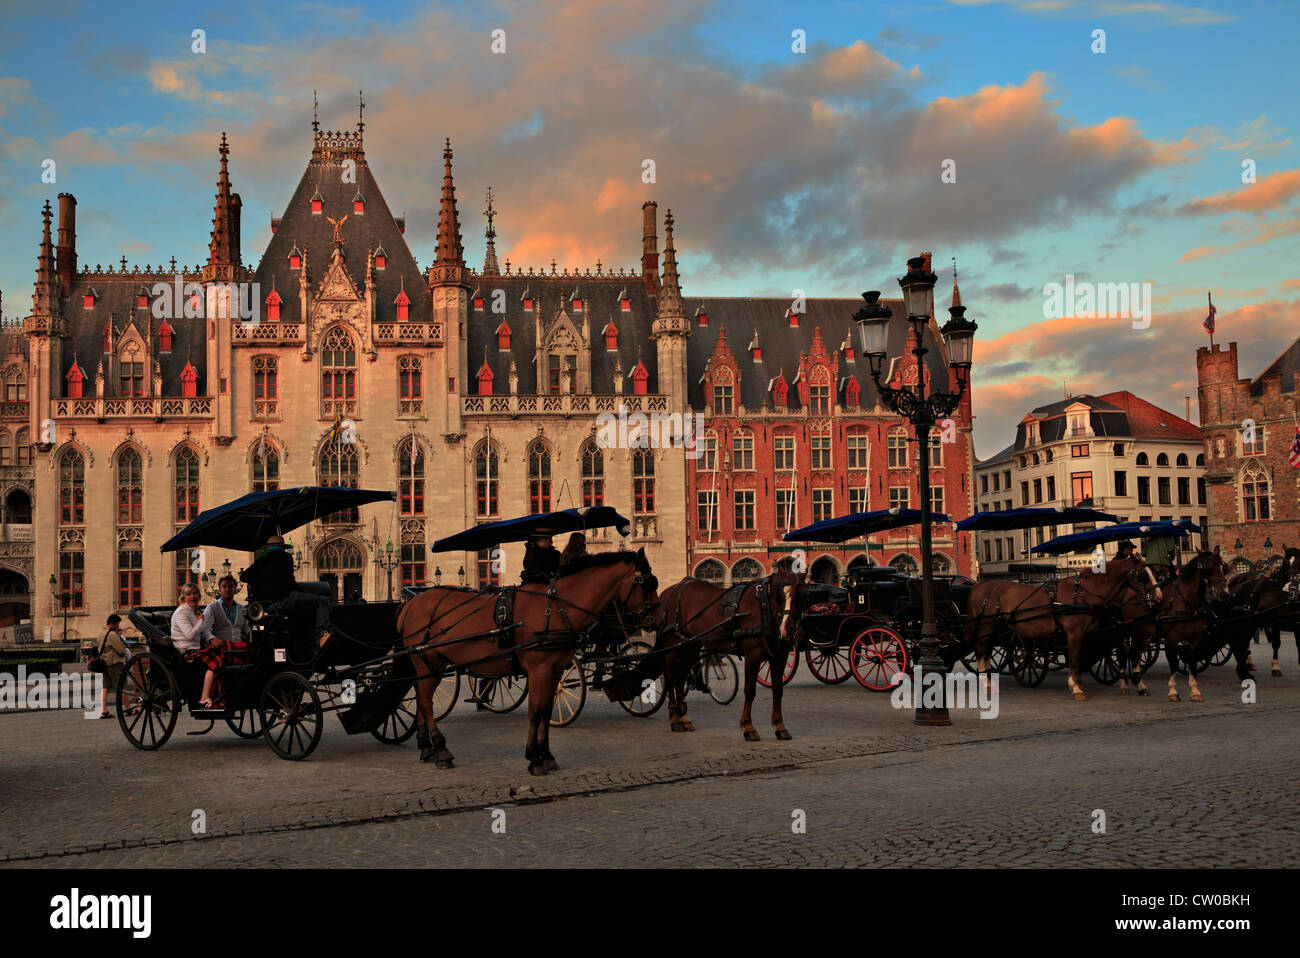 The Government Palace is lit by the evening light as horse drawn carriages wait for tourists in Bruges, Belgium Stock Photo